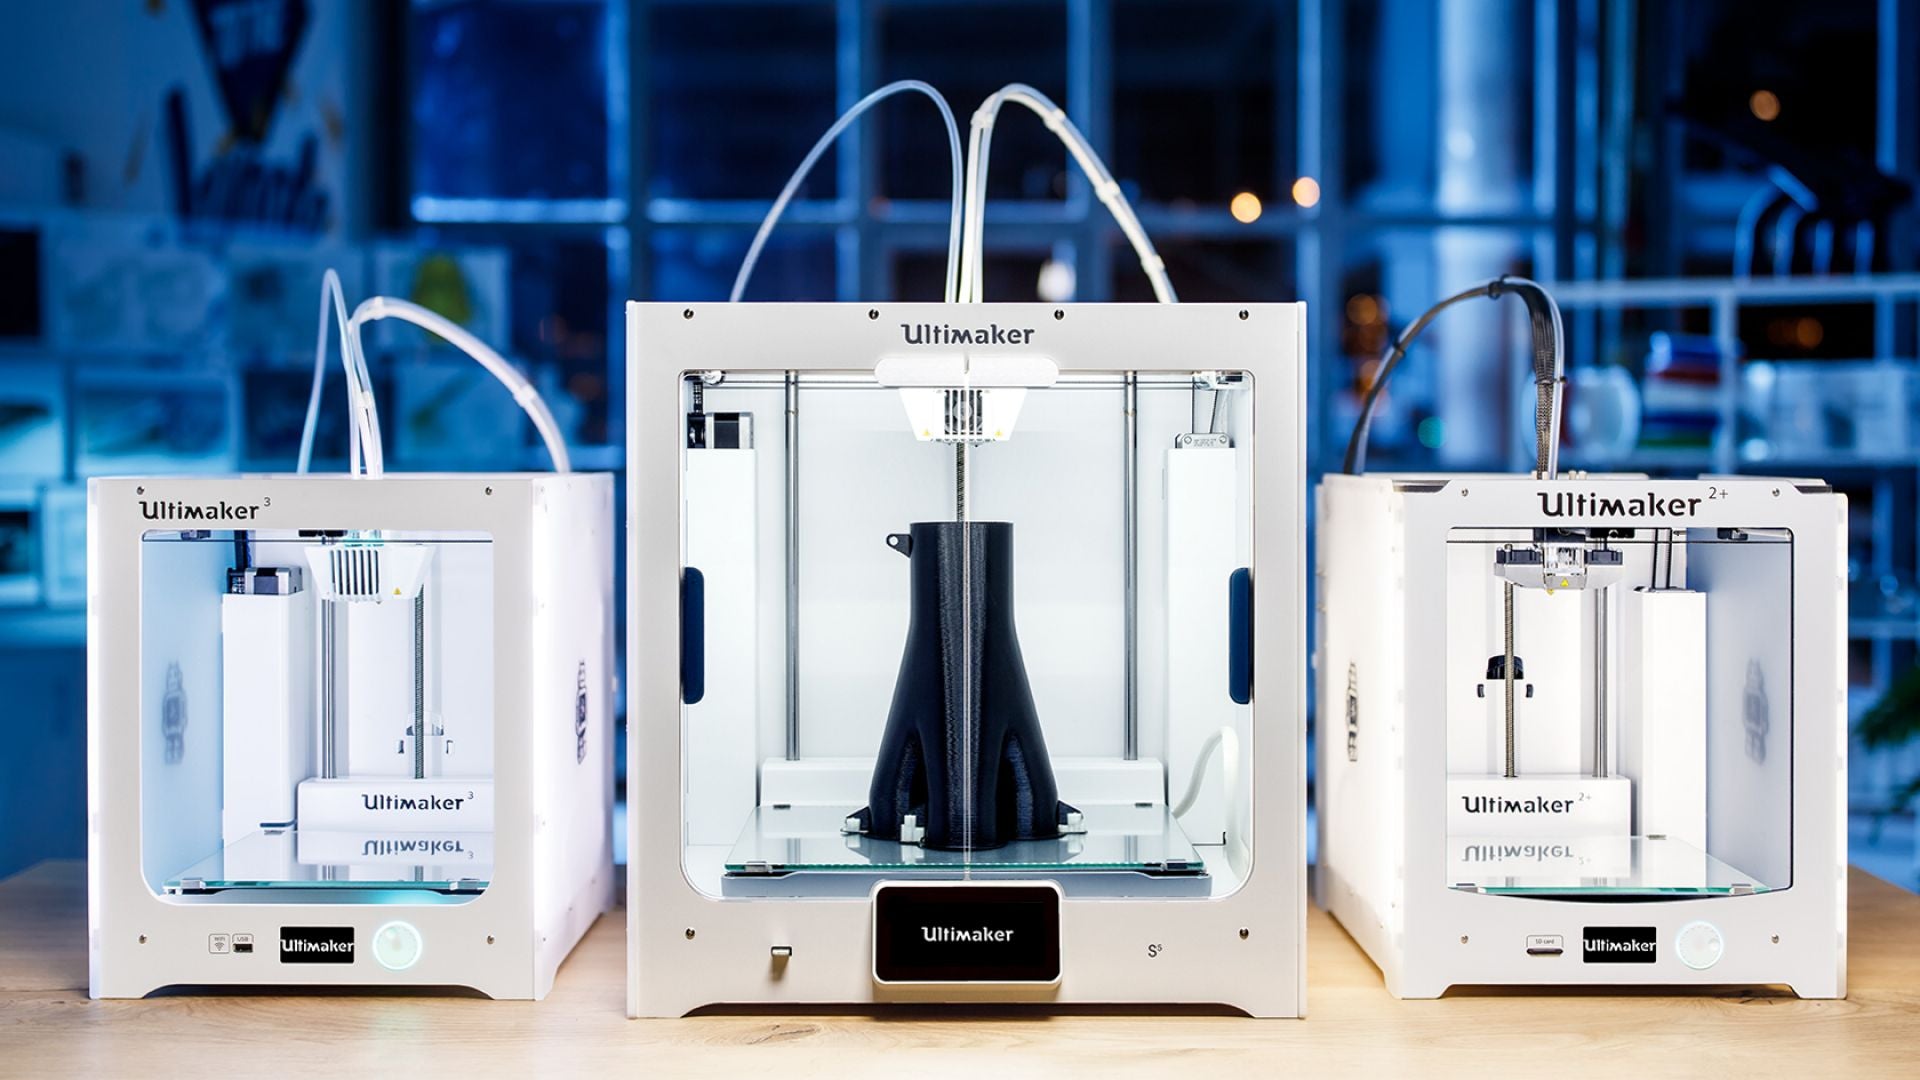 FDM vs. FF: What's the Difference Between These 3D Printers